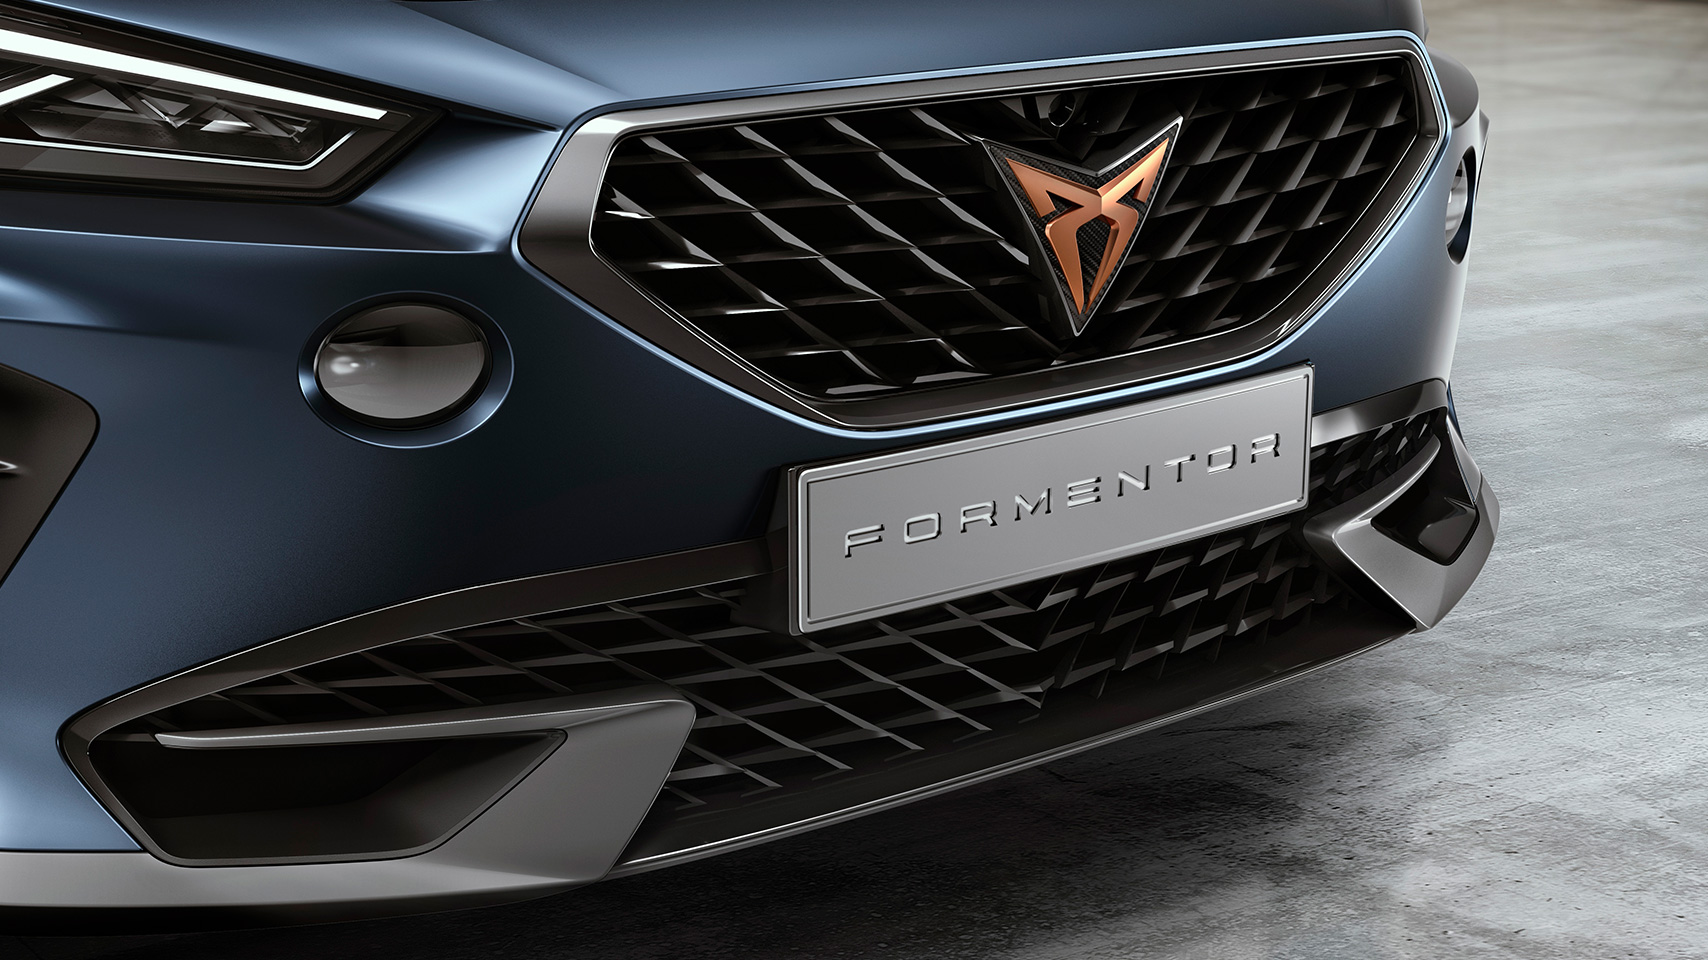 CUPRA CUV Formentor front grill view